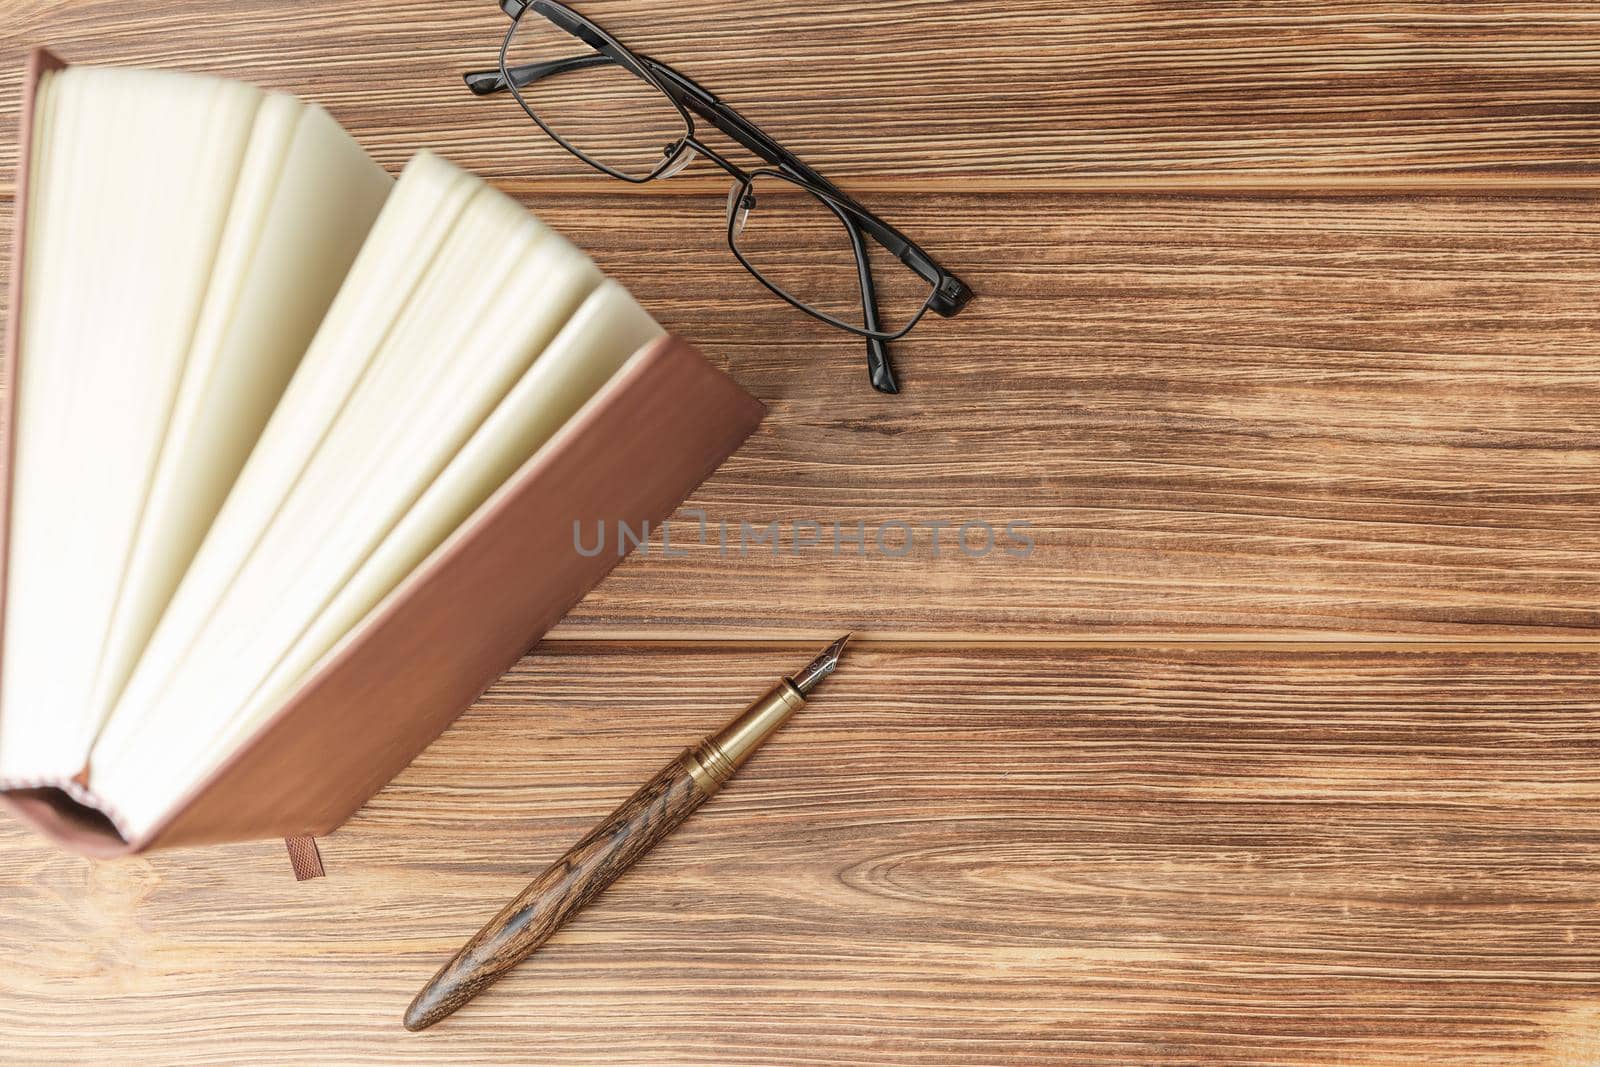 Upright book notebook notepad glasses and wooden gold fountain pen on light wooden background top view close up.